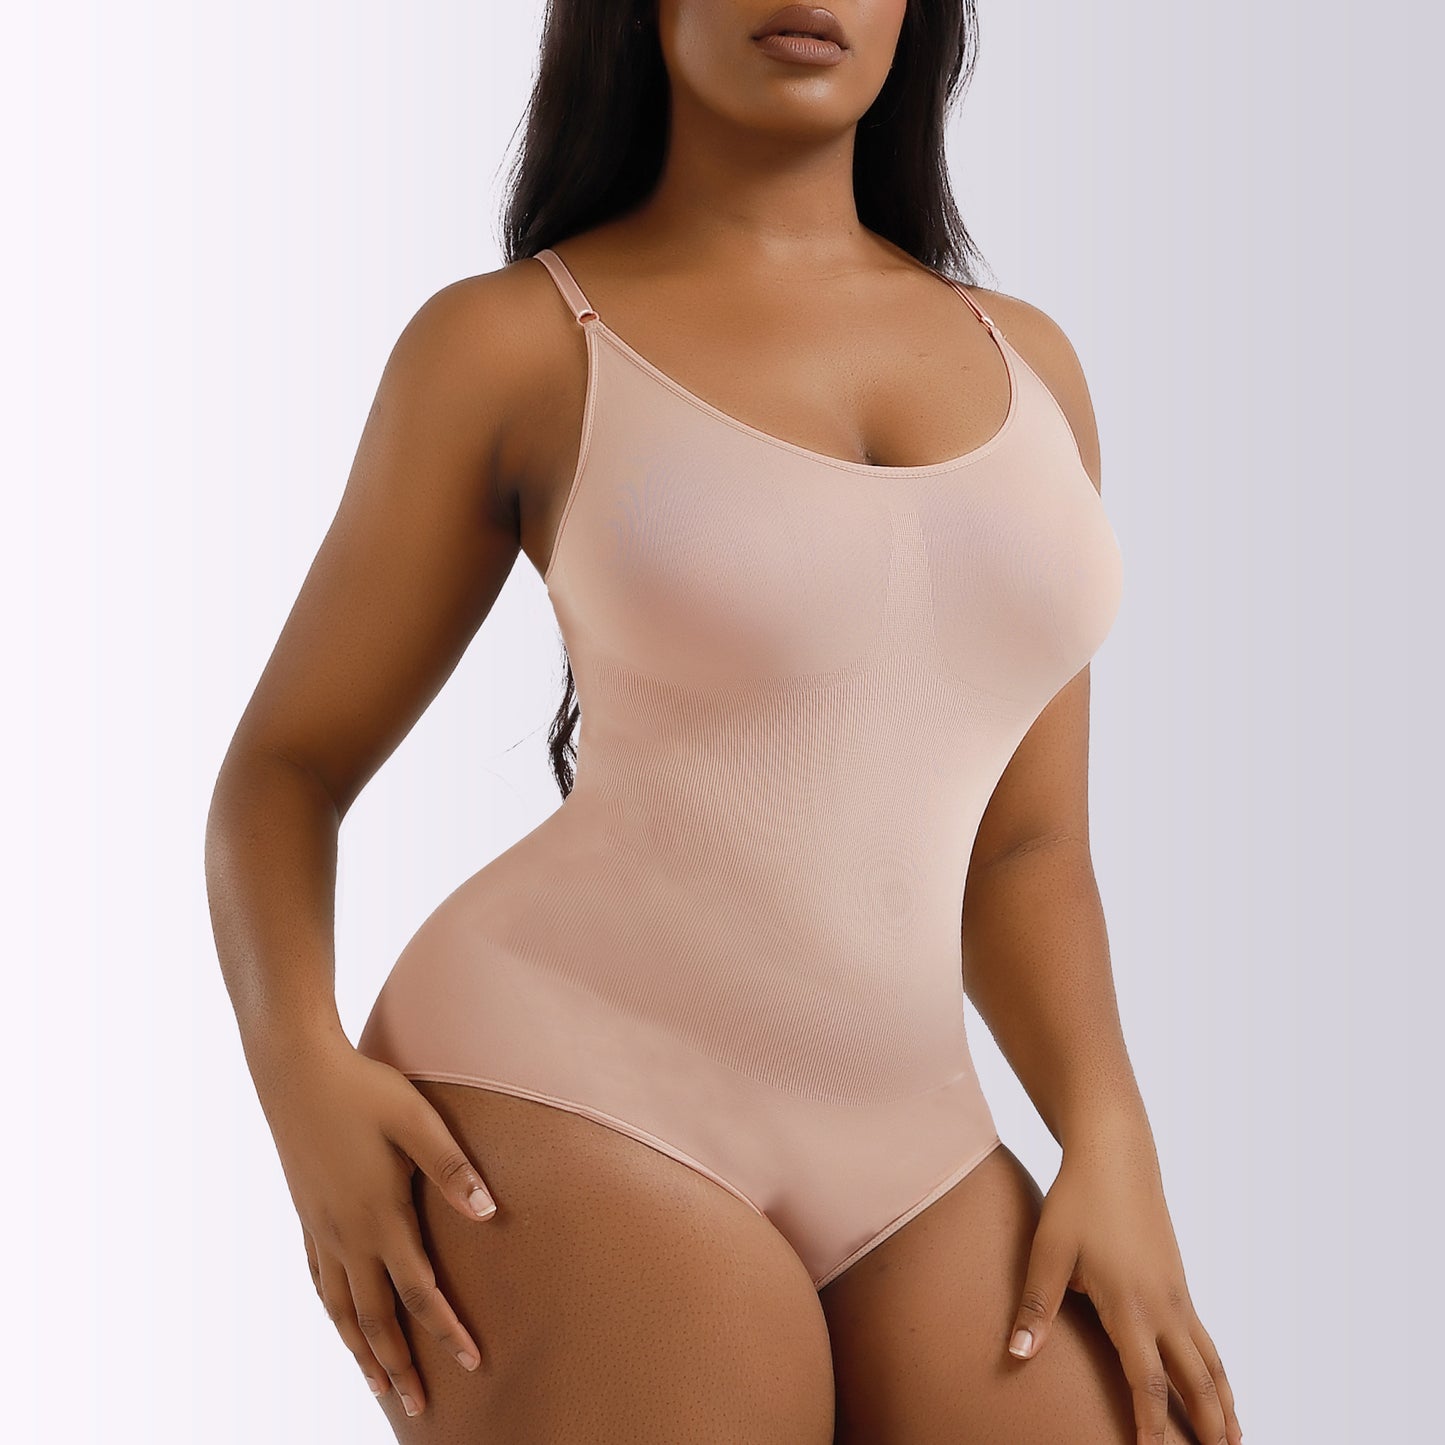 Shape Snatched - Buy 1 & Get 1 Free